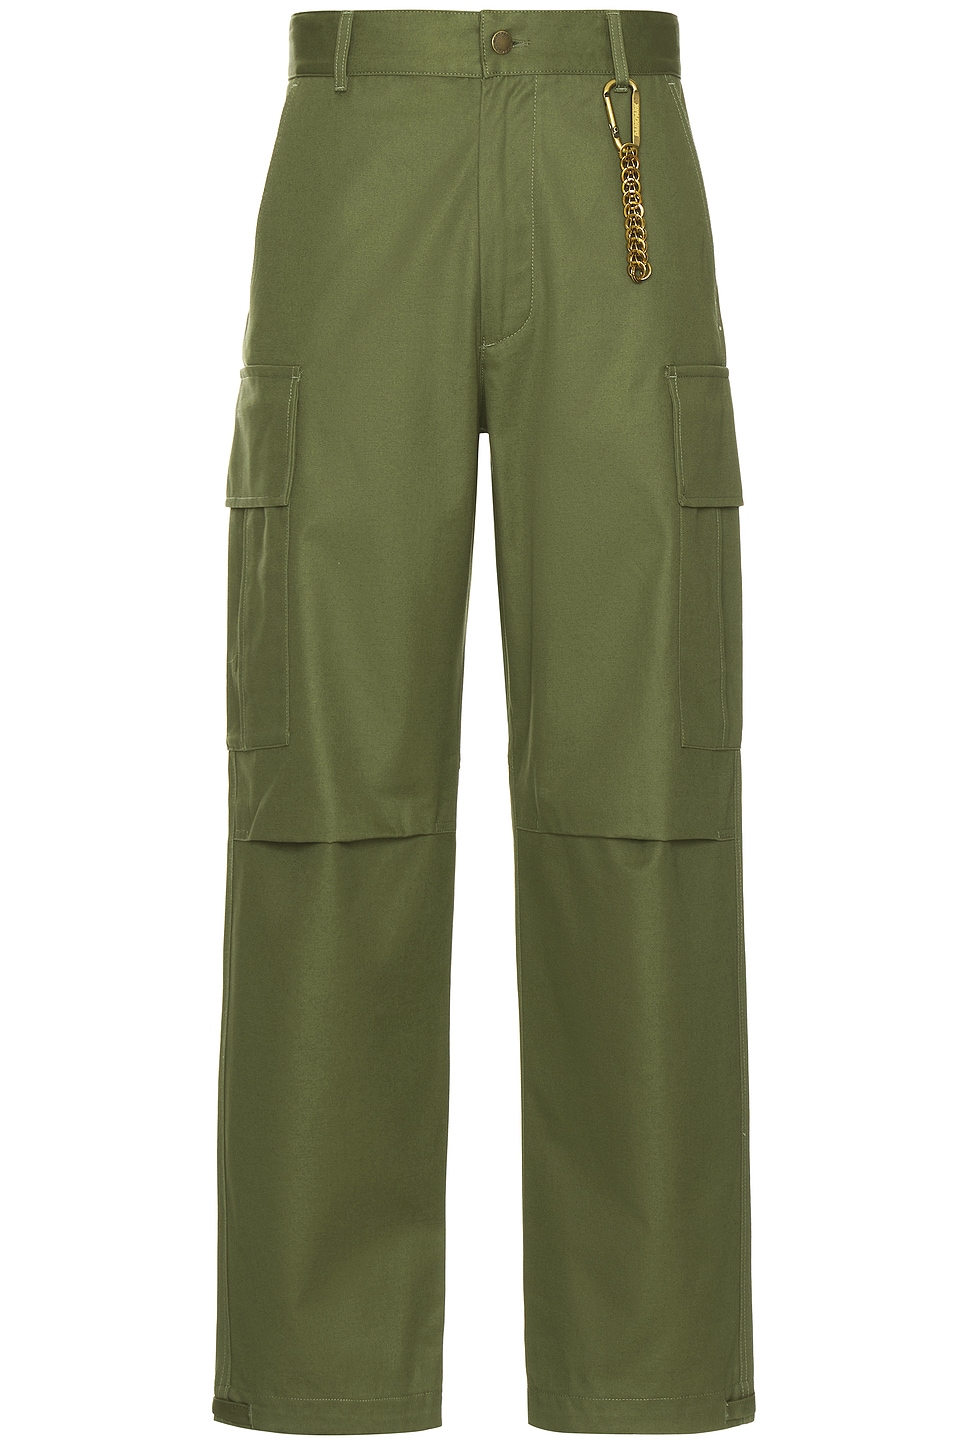 Image 1 of DARKPARK Saint Heavy Twill Cargo Pants in Military Green